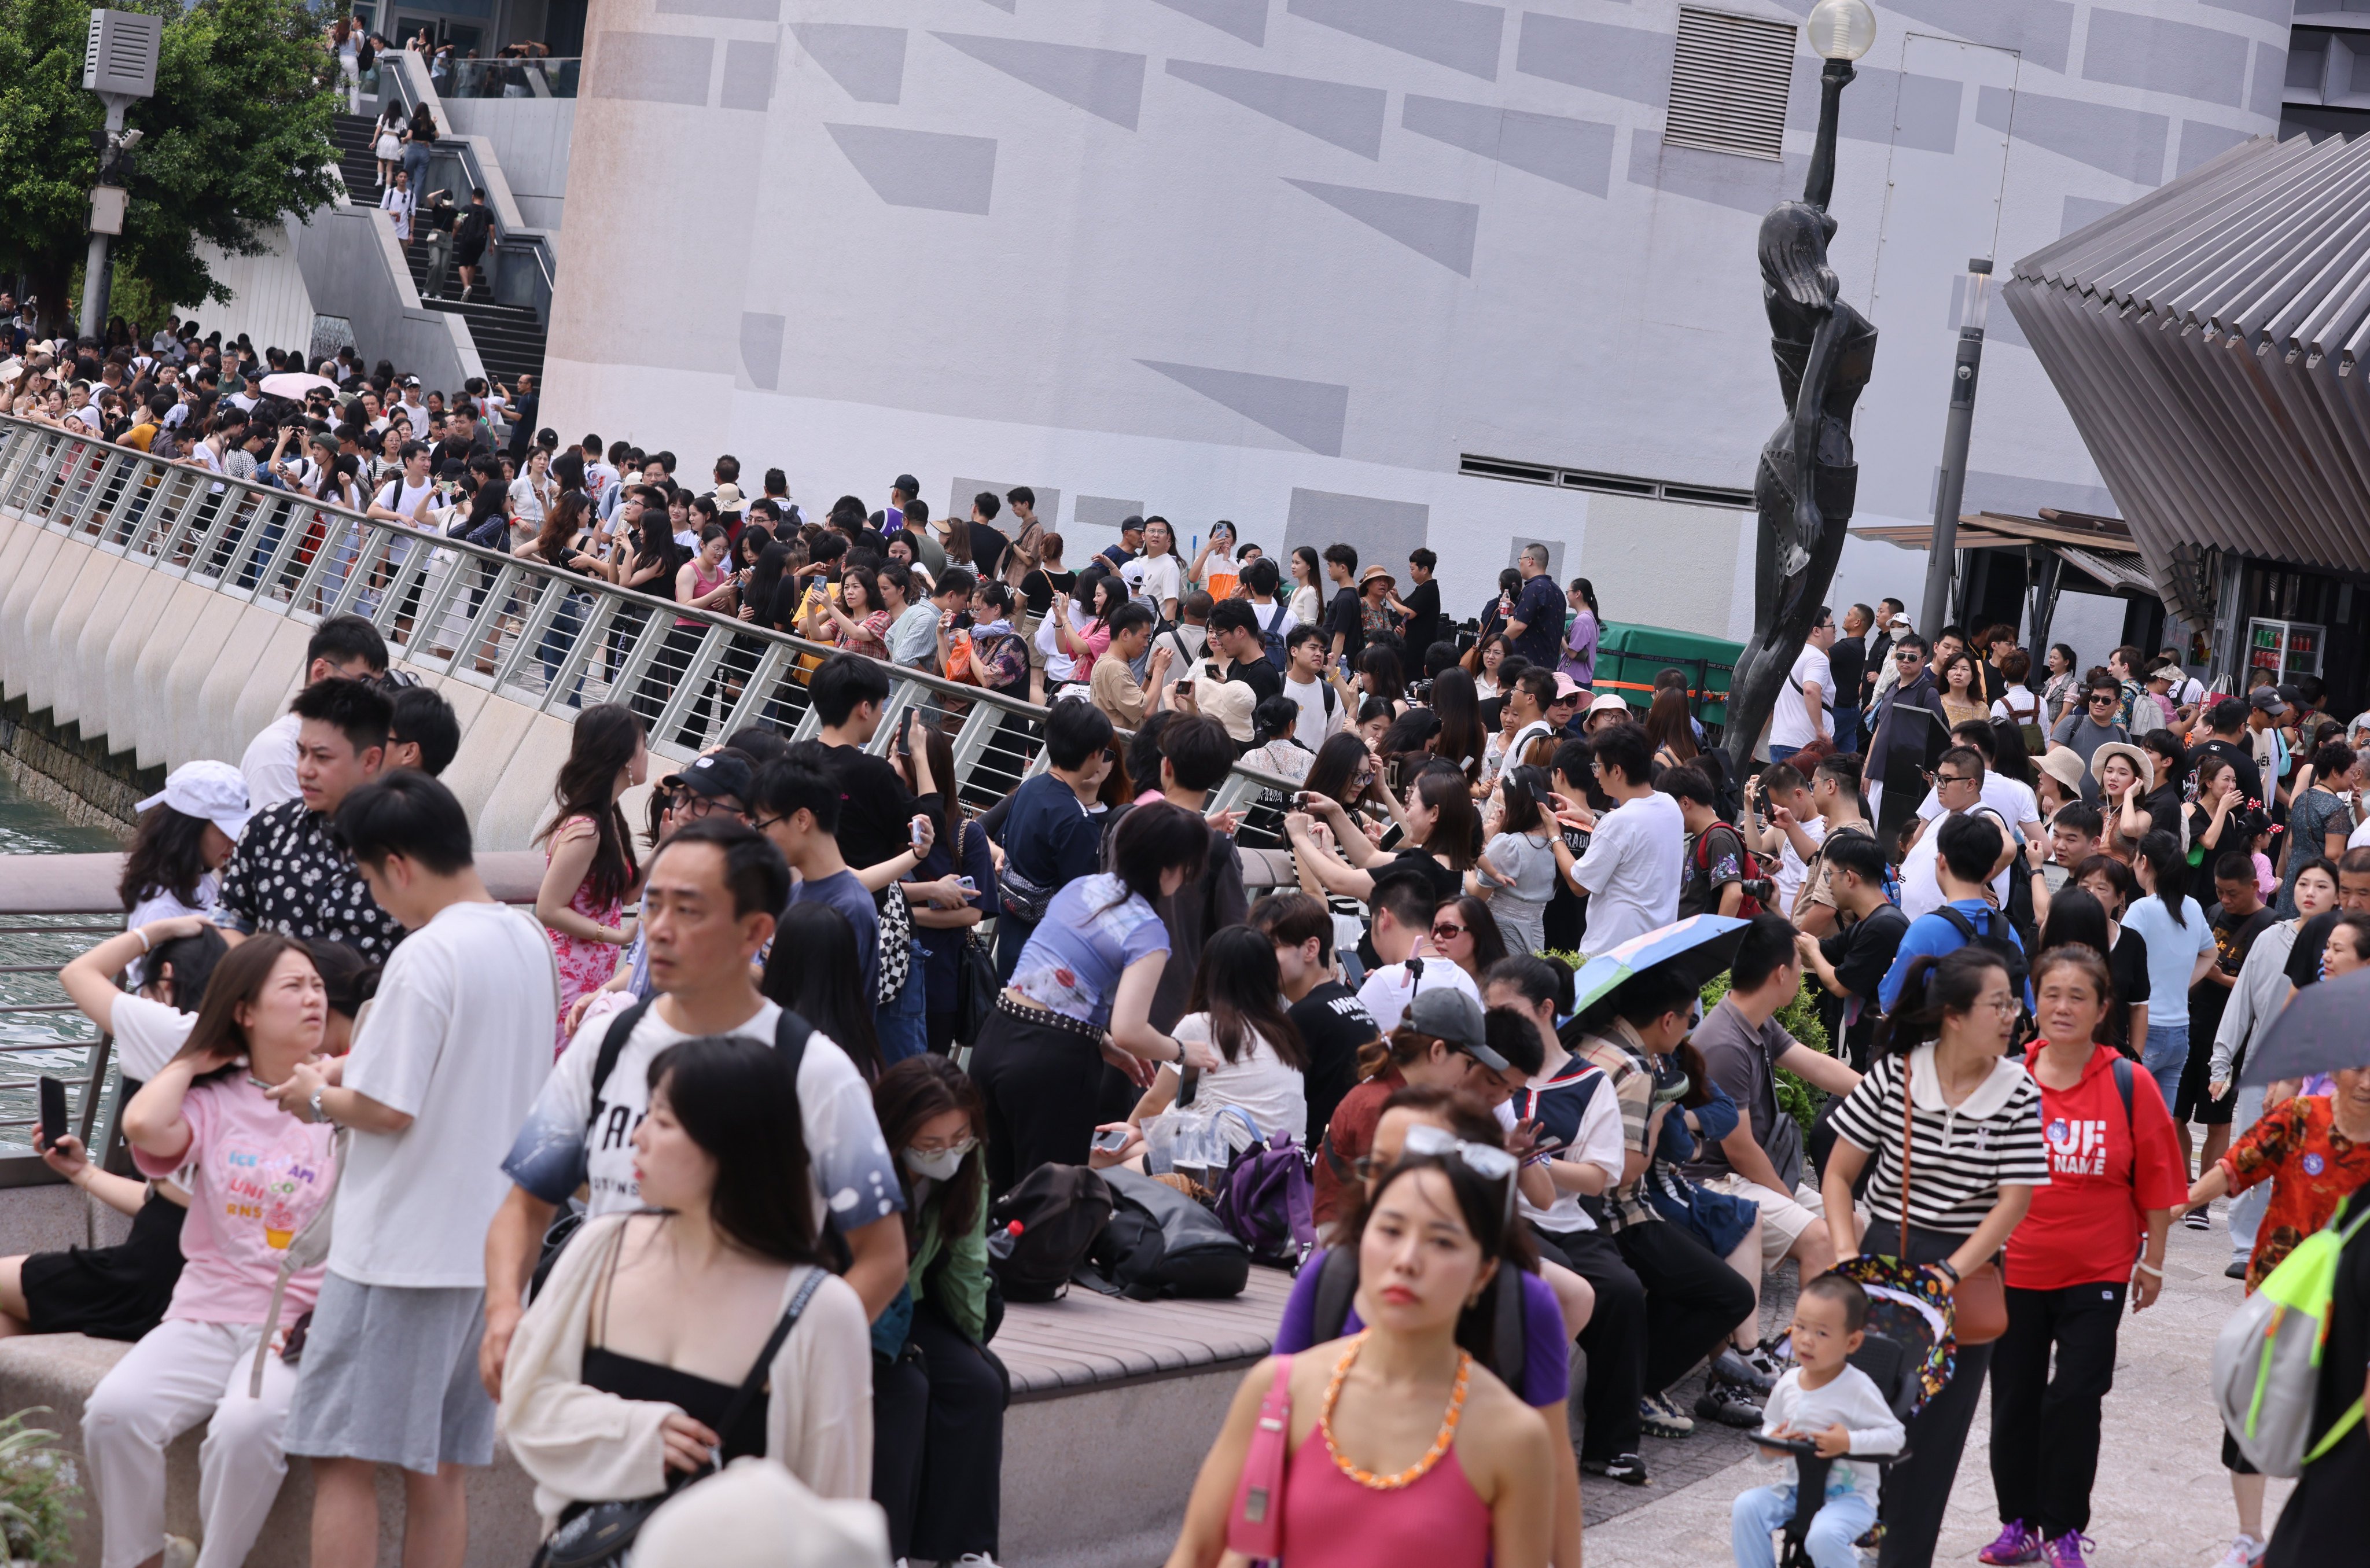 Tourists at the Avenue of Stars at Victoria Harbour in Tsim Sha Tsui on October 2 during the Golden Week holiday period. Arrivals by mainland tourists are recovering, but Western tourists have been slow to return in the wake of travel restrictions being lifted. Photo: May Tse